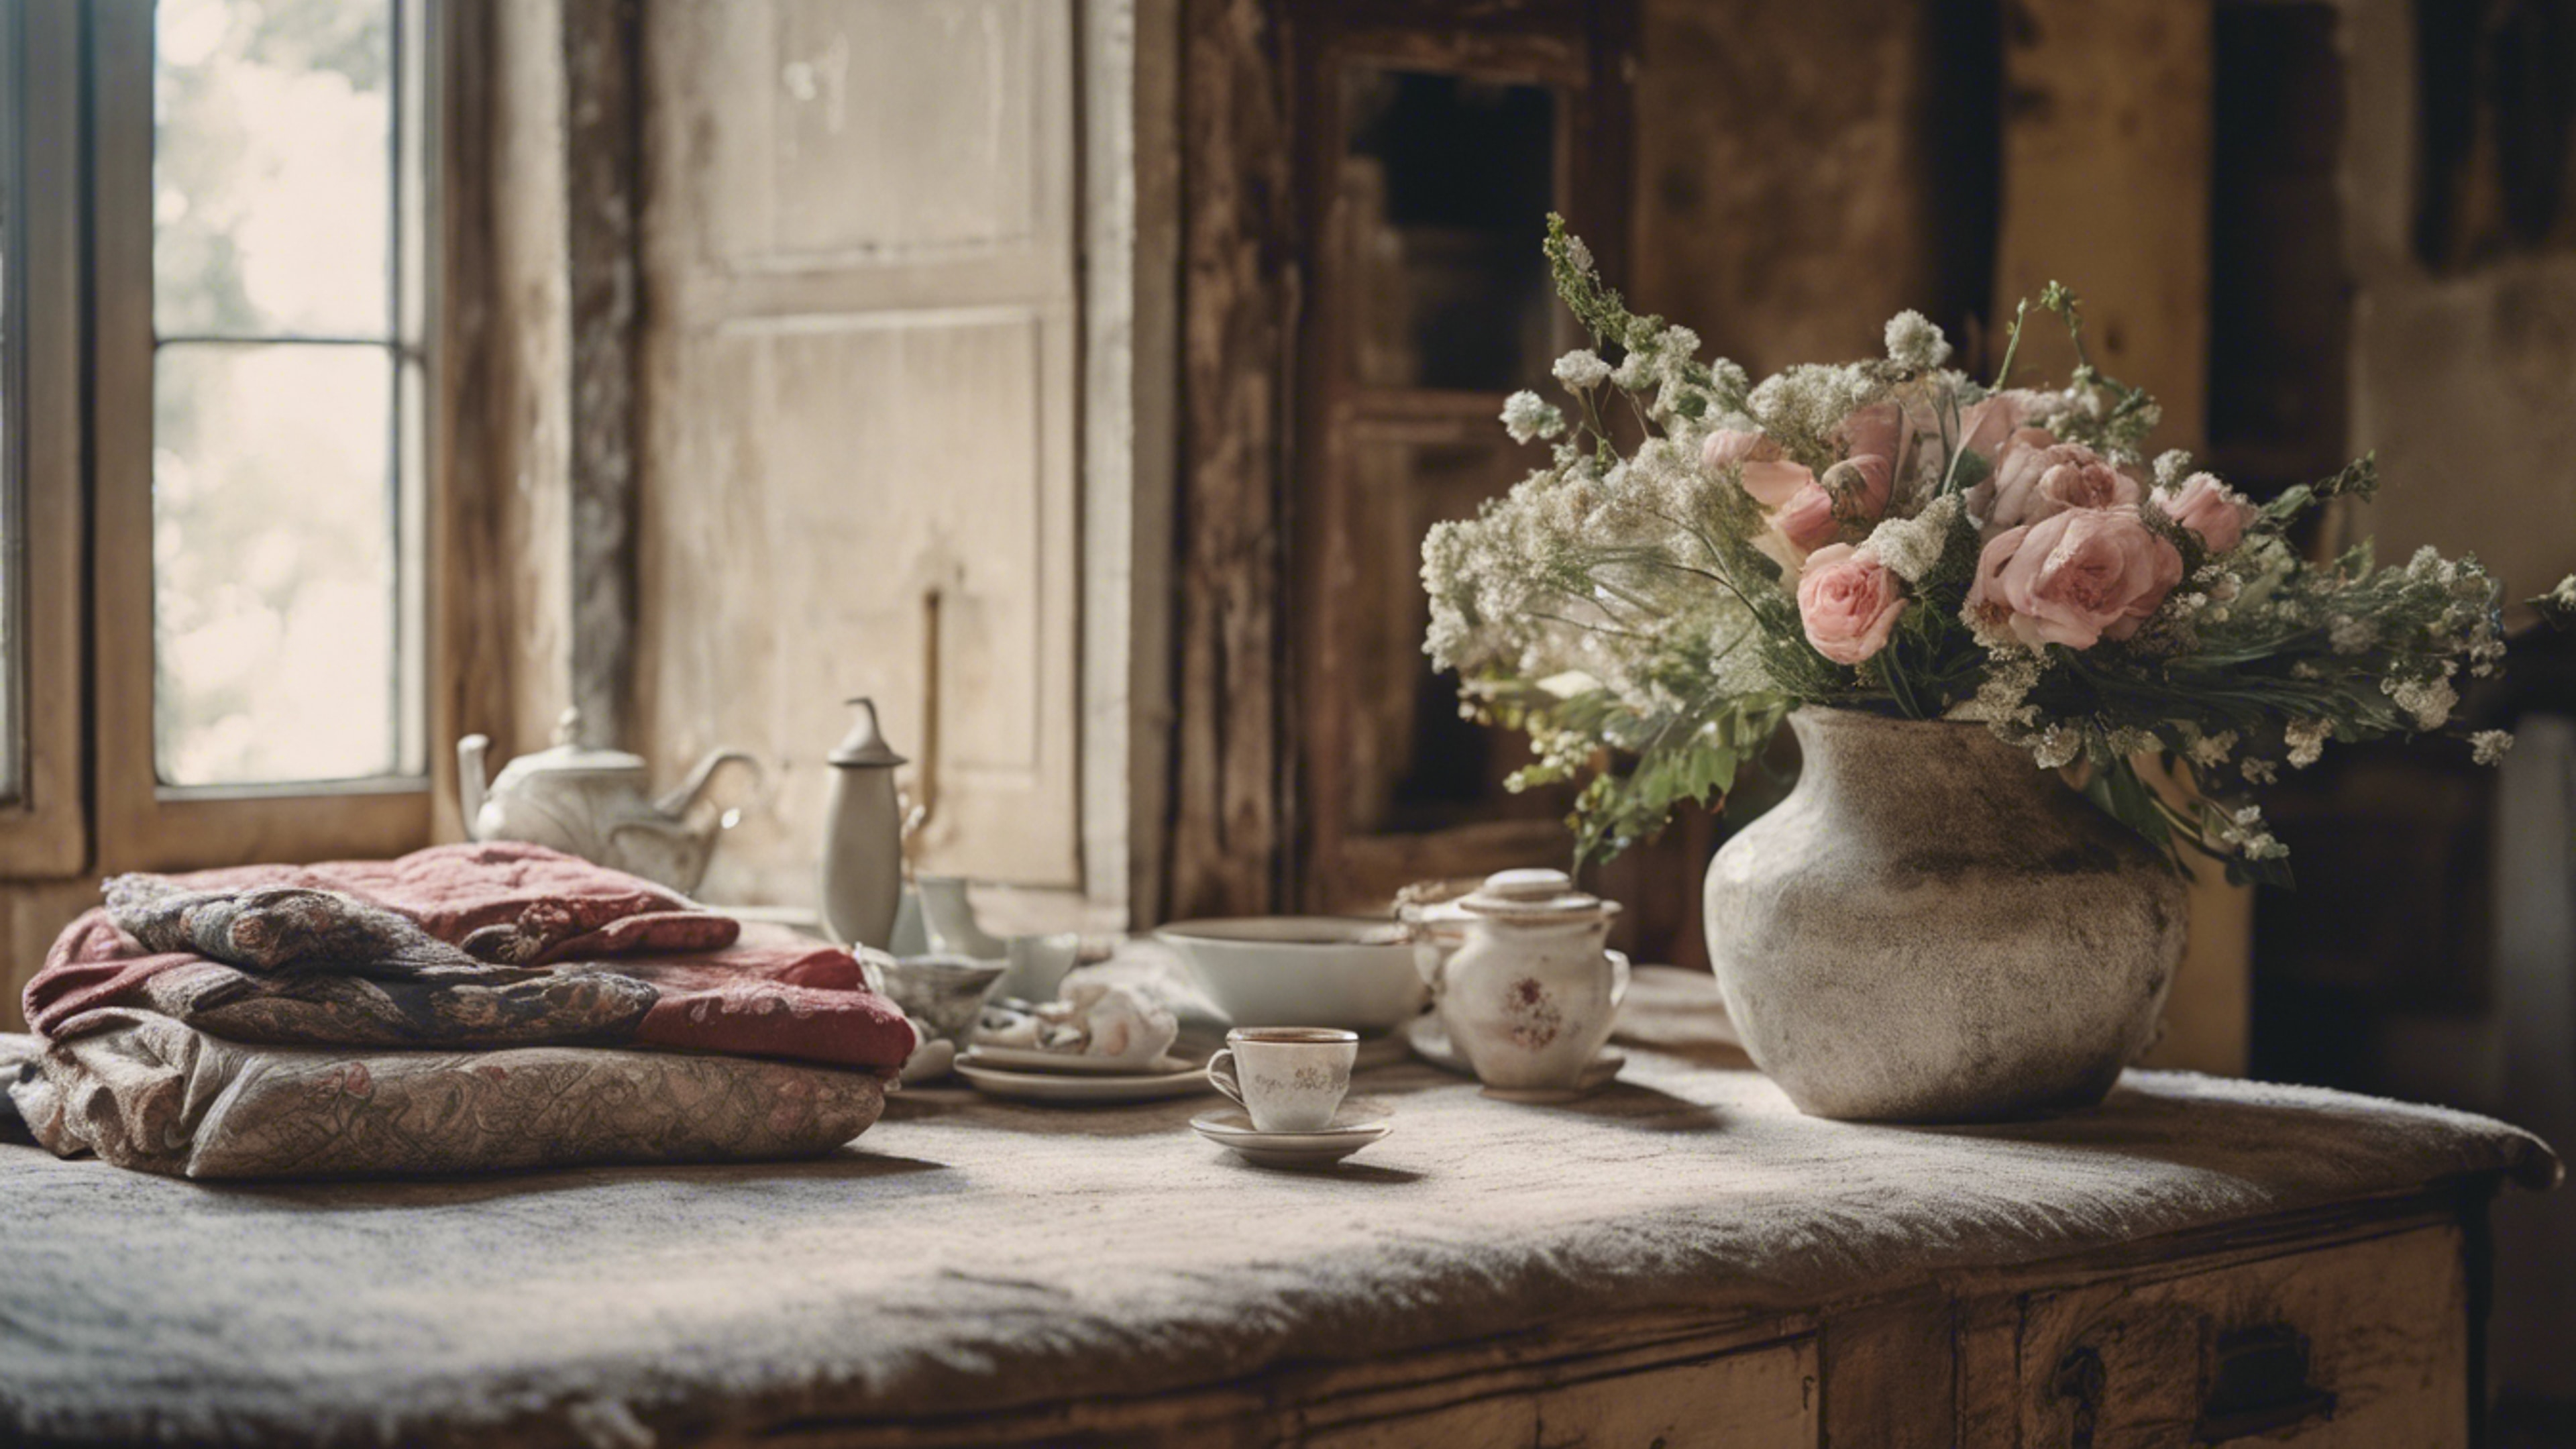 Vintage French country home interiors, full of hand-stitched textiles, distressed furniture, and fresh flowers. 牆紙[3ce768b1b5e34f149bef]